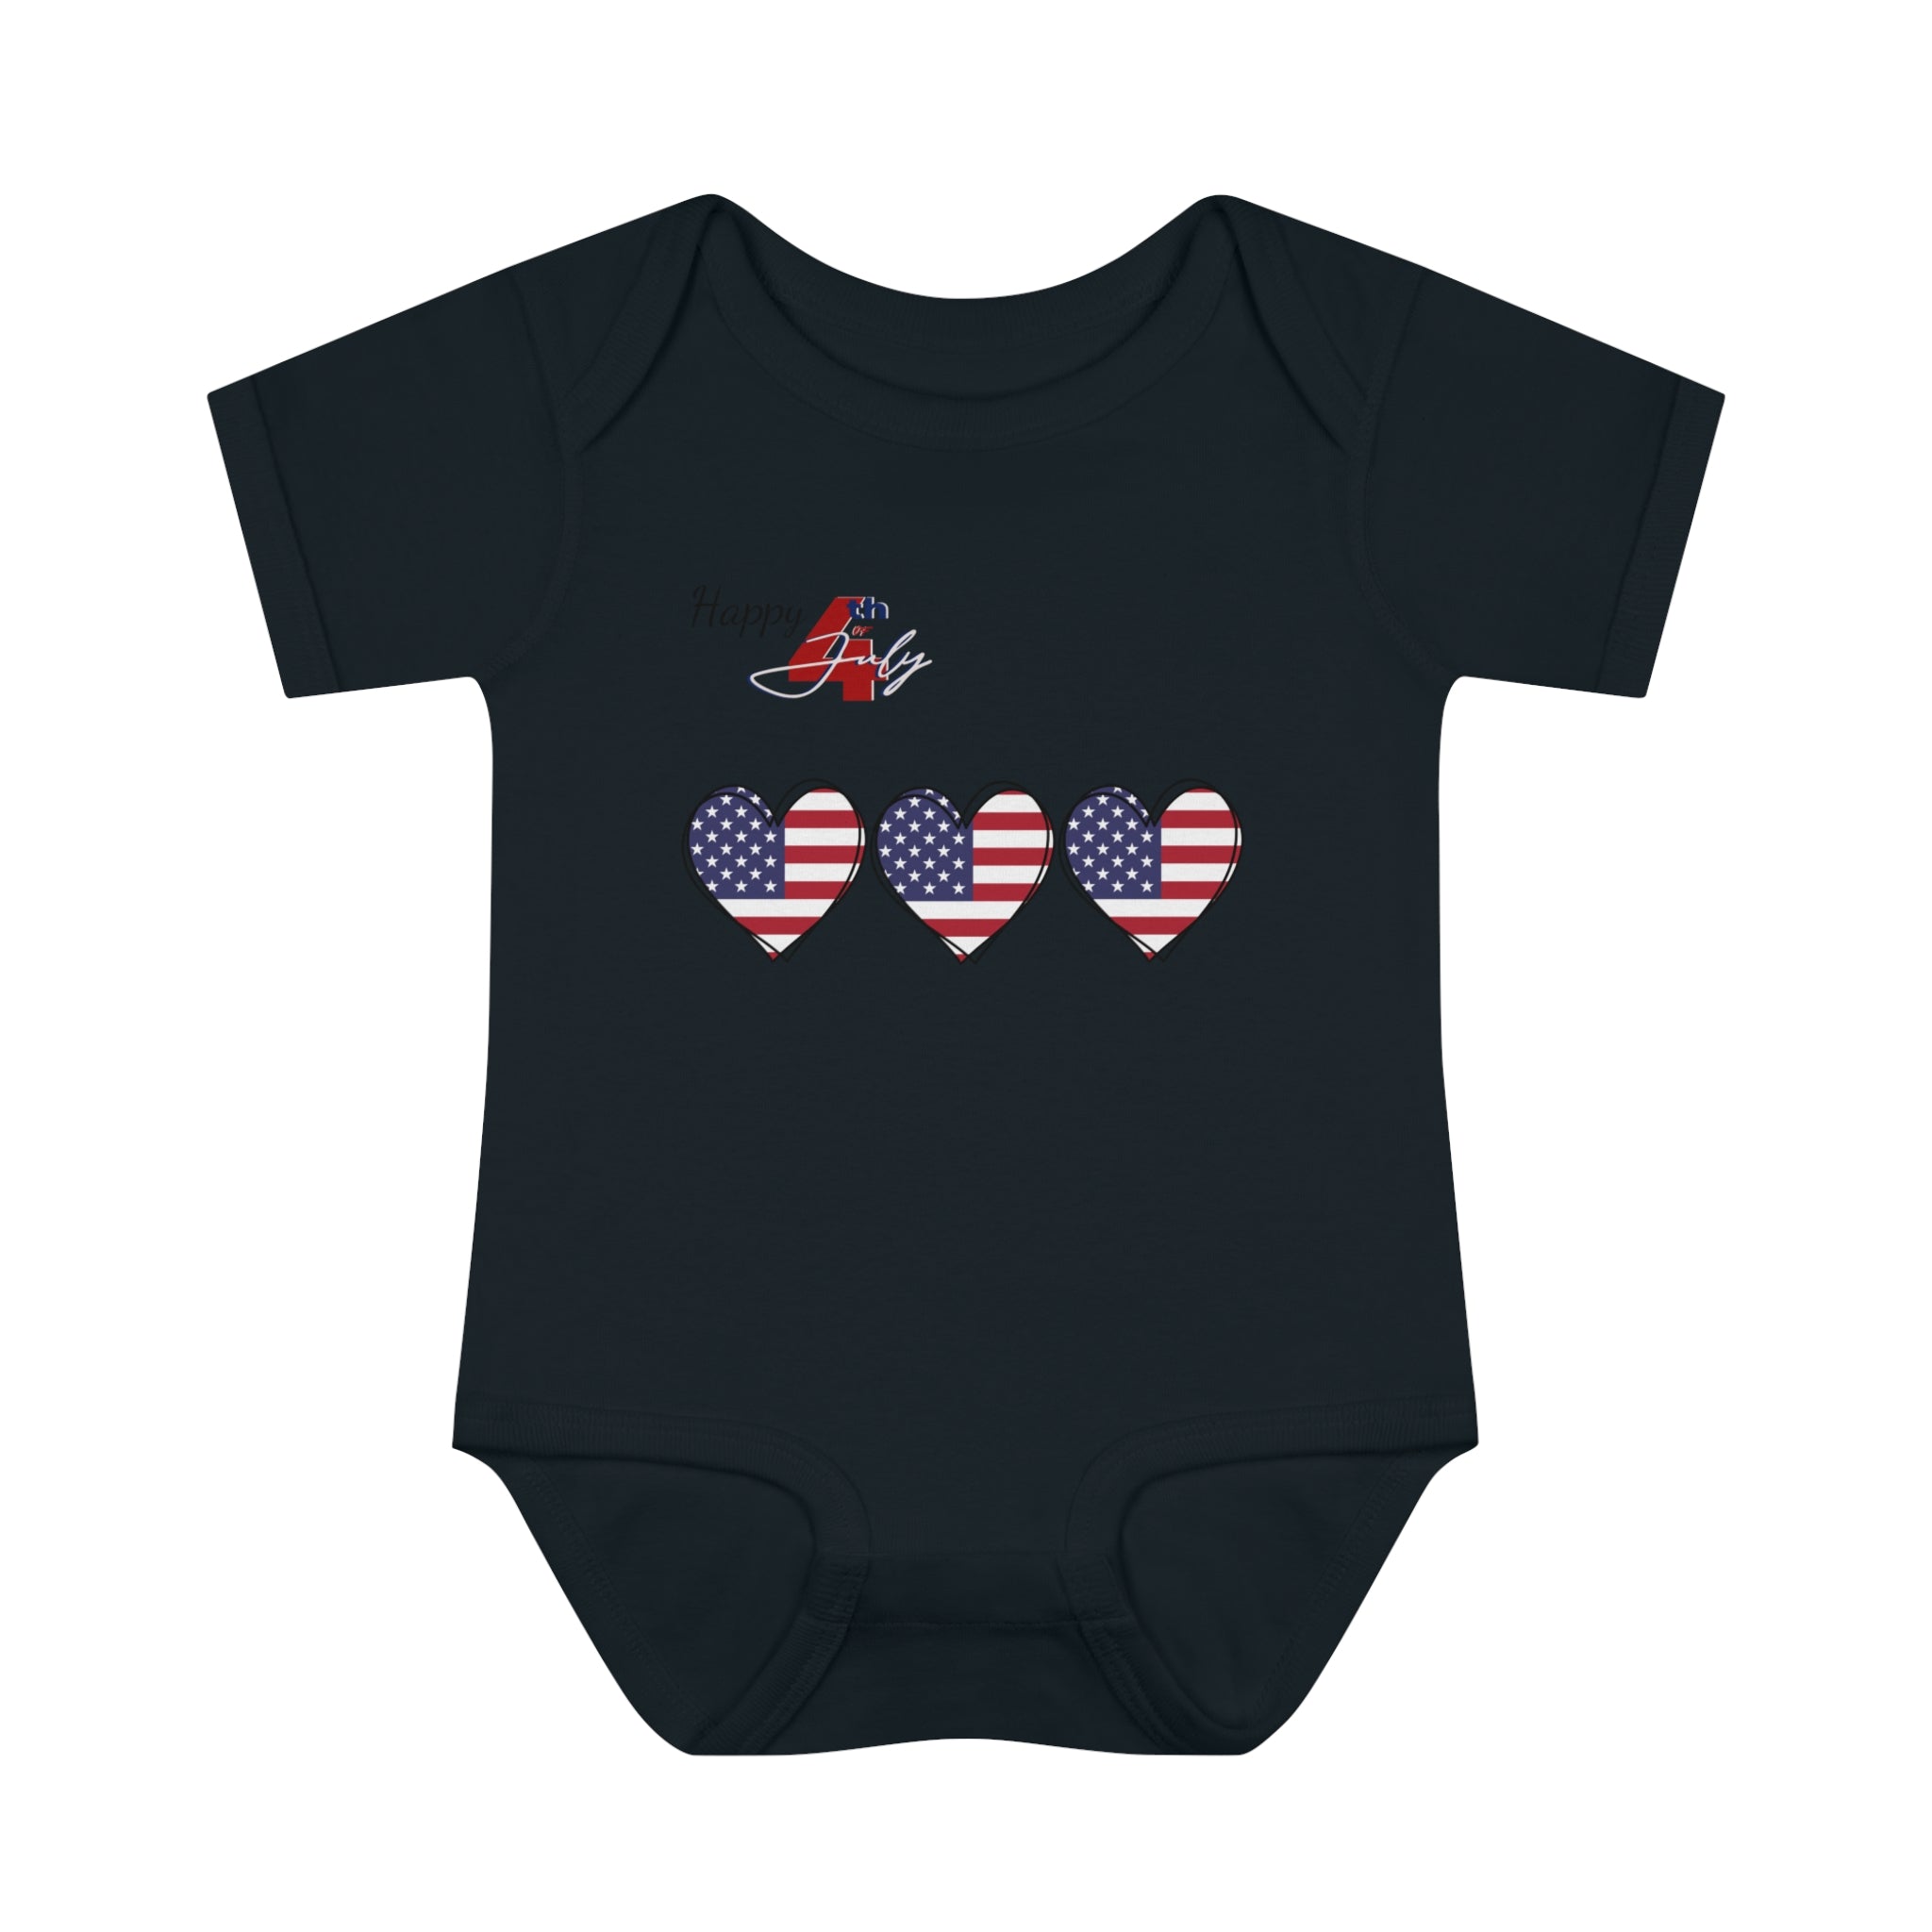 Happy 4th of July 3 Hearts Design Baby Bodysuit